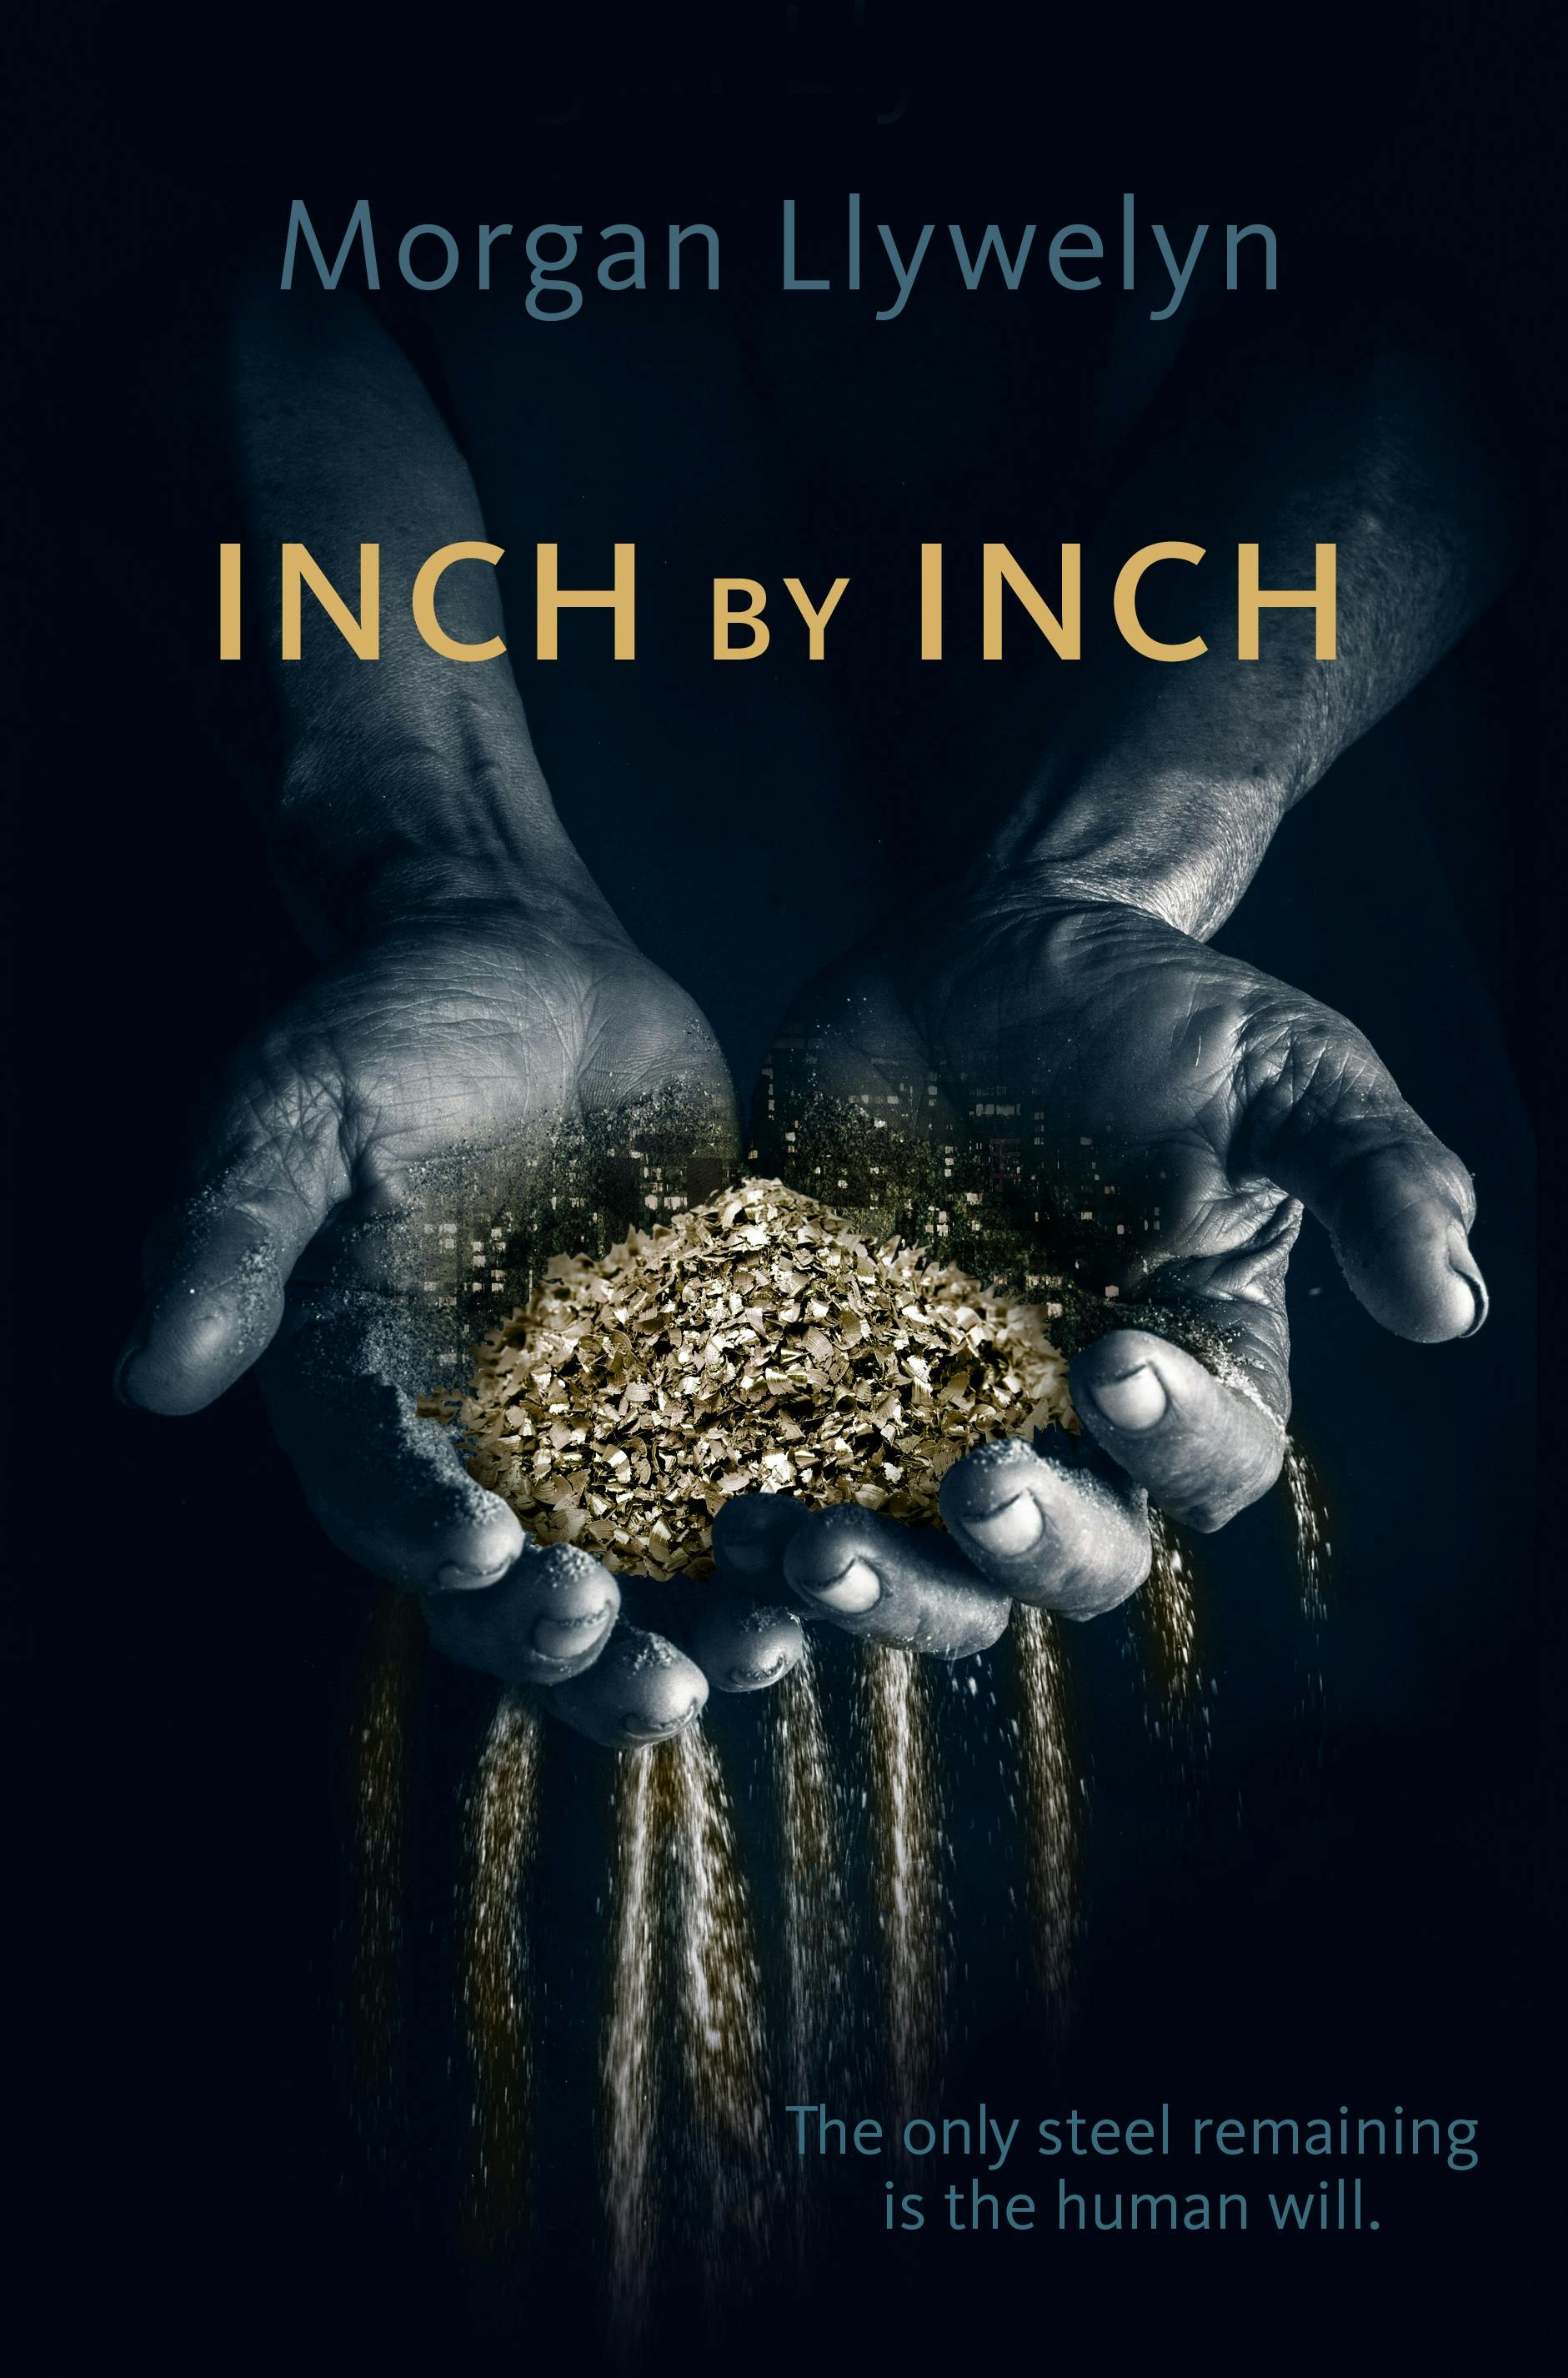 Cover for the book titled as: Inch by Inch